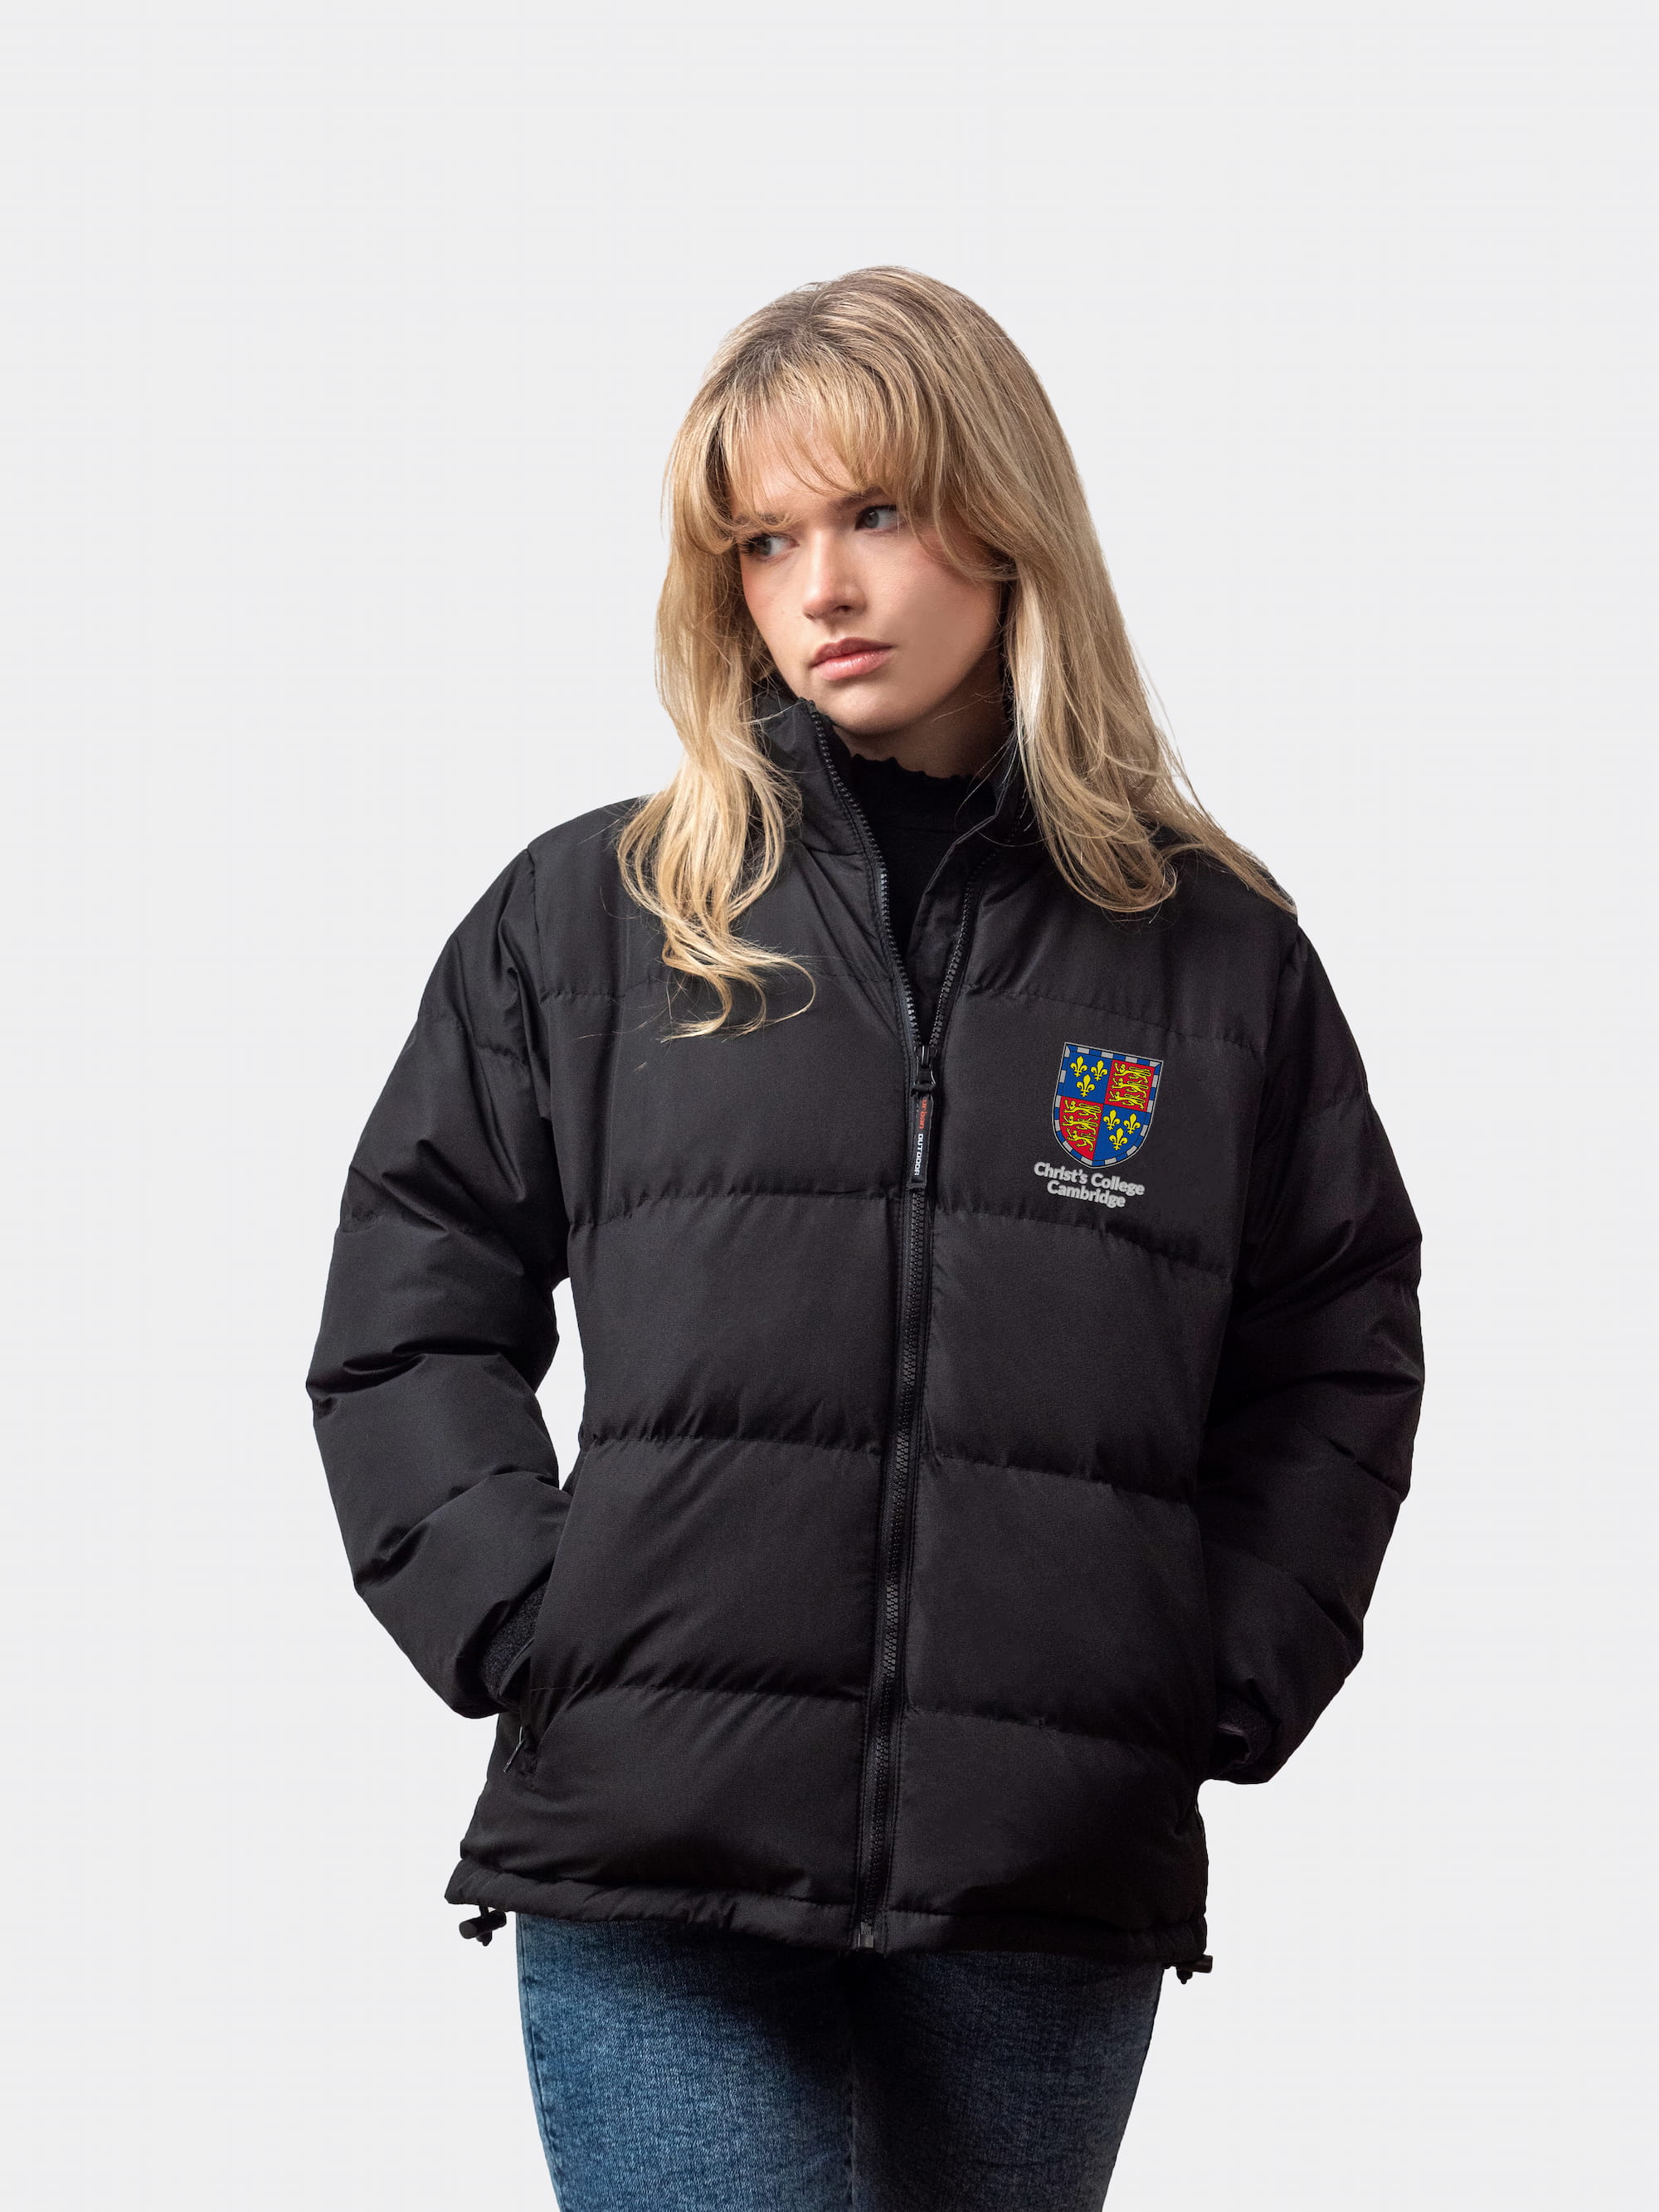 A personalised women’s Puffer Jacket, with Cambridge University crest, from Redbird  Apparel